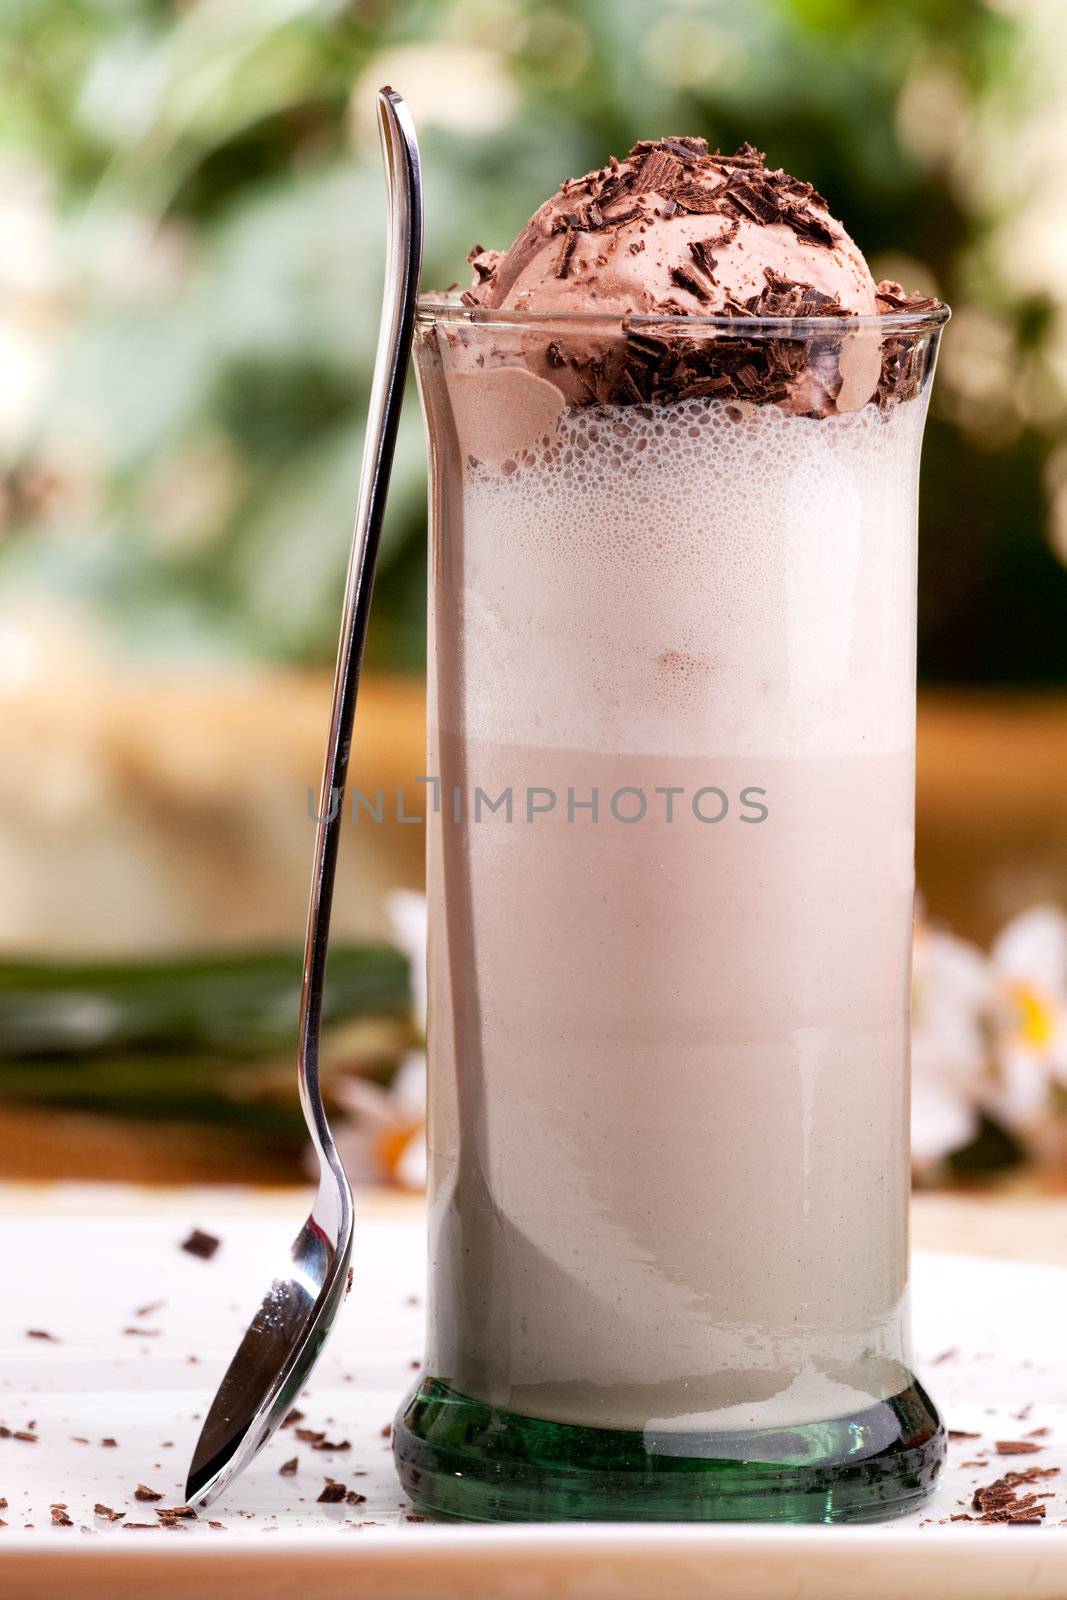 A chocolate milk float in an outdoor natural setting